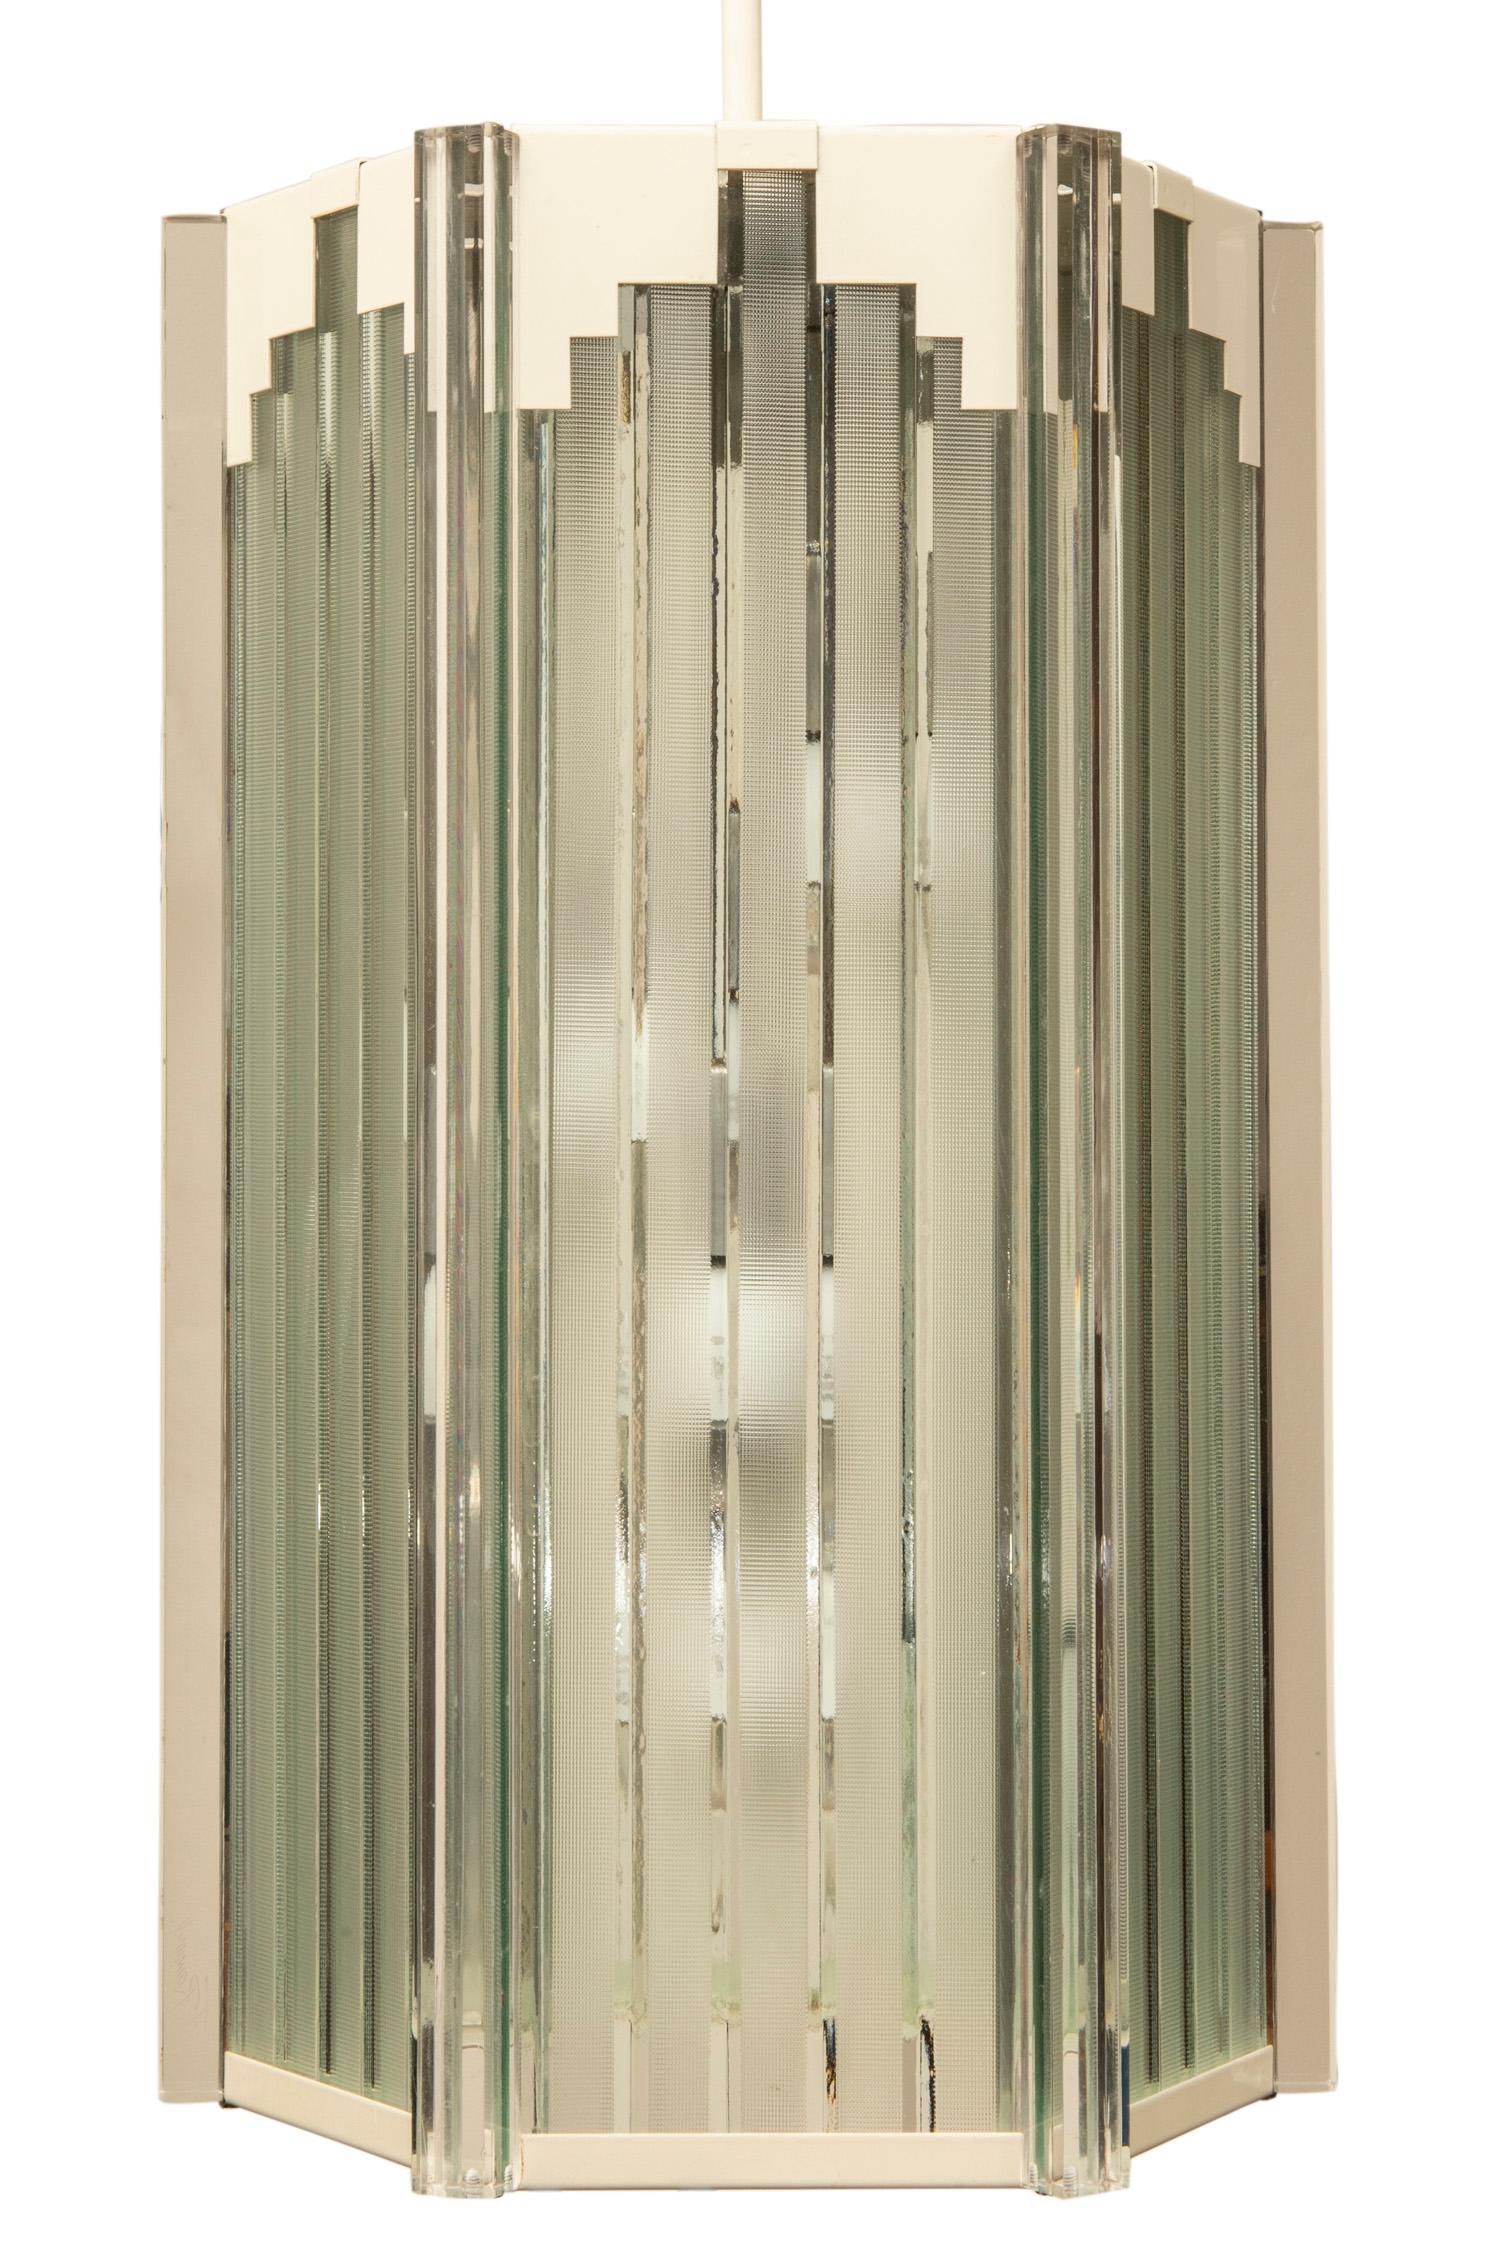 This Art Deco inspired four light pendant in white with acrylic etched window panels is
mounted with a center poll that can be cut to suit your height restrictions. It bears its 
original Frederick Raymond label dated 1985.